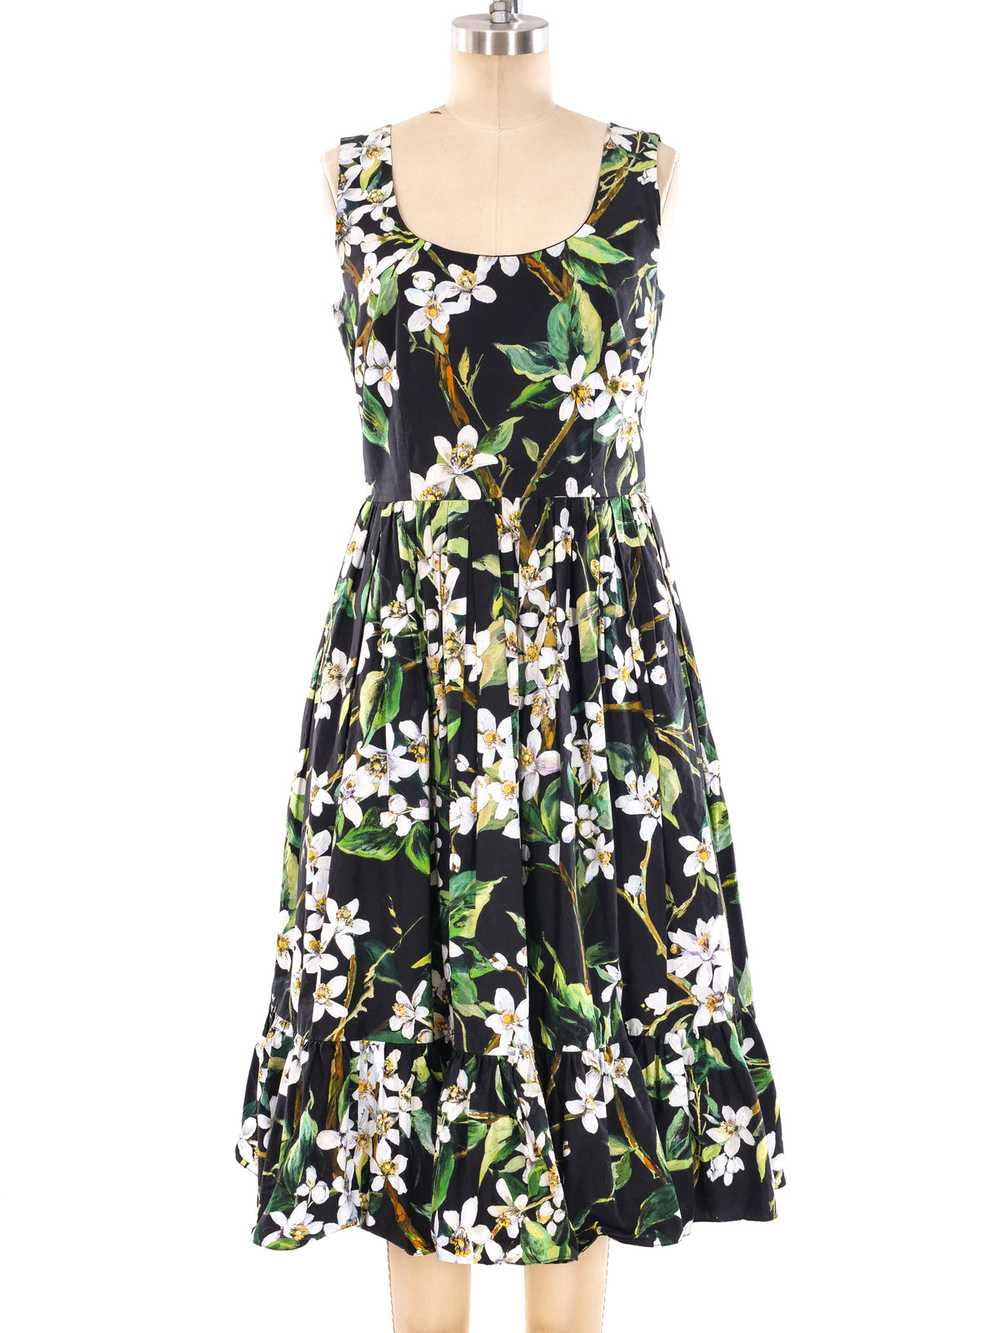 Dolce and Gabbana Floral Printed Tank Dress - image 1